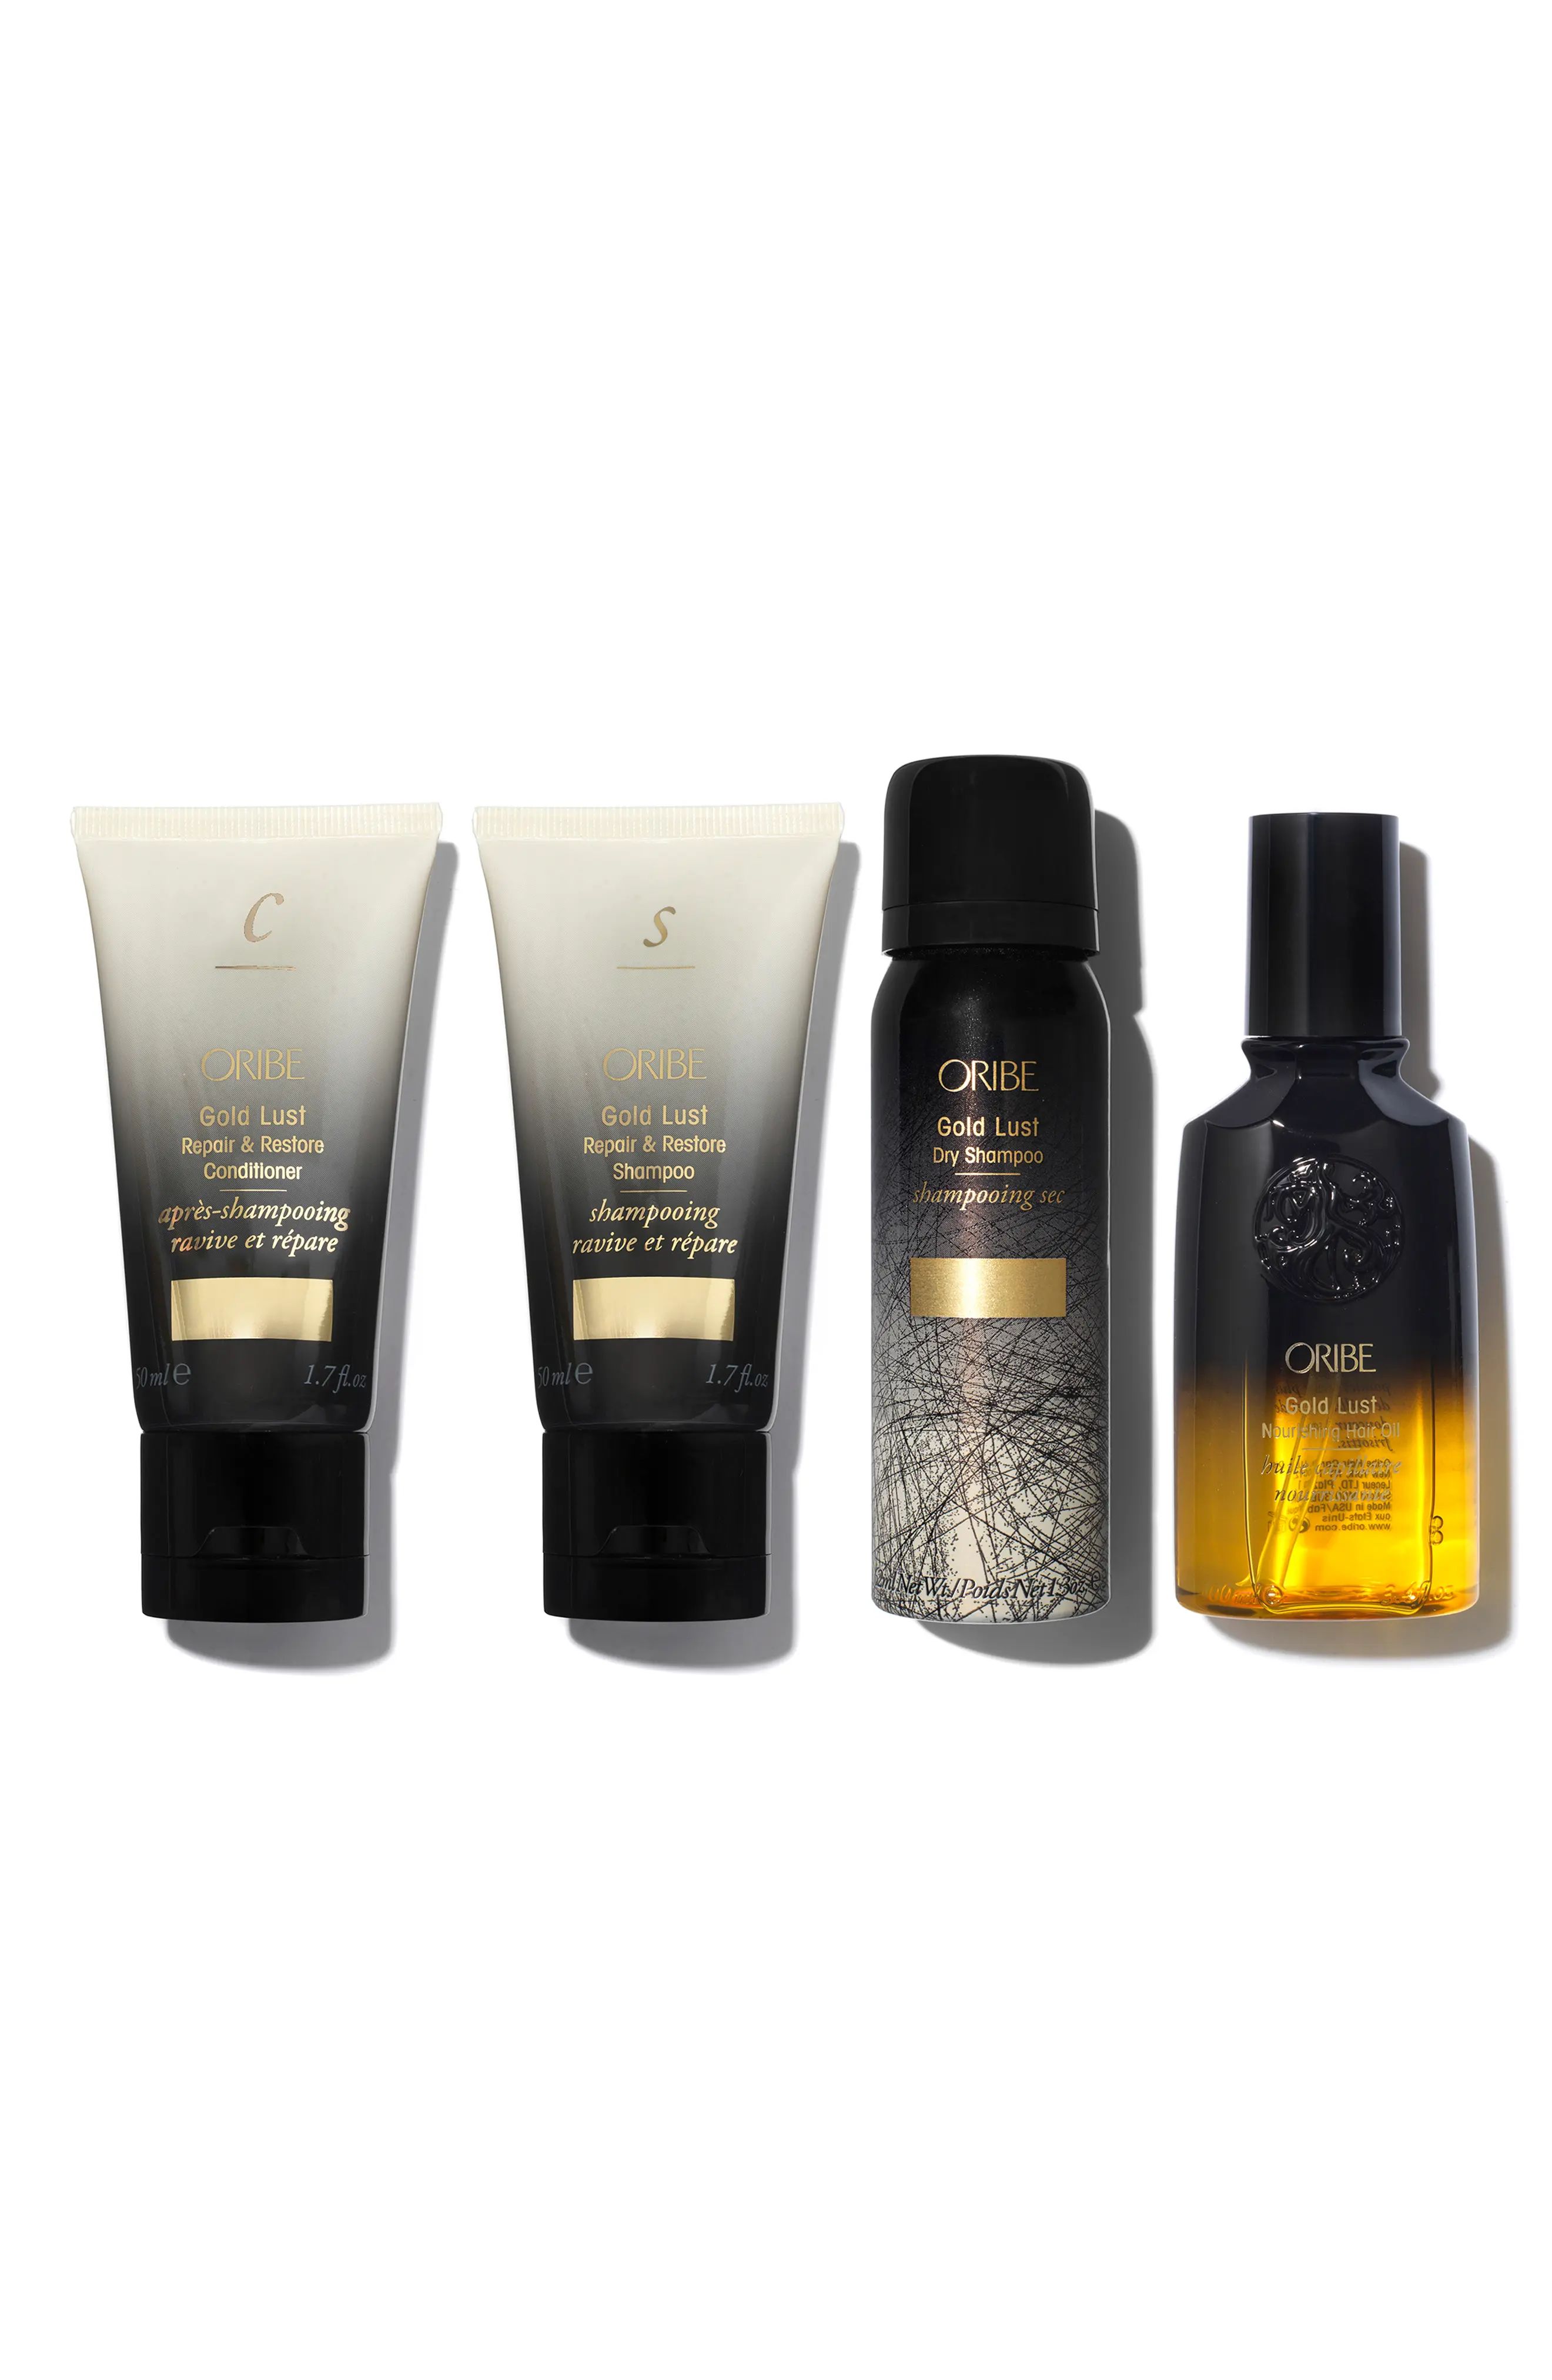 SPACE.NK.apothecary Oribe Gold Mine Set ($95 Value) | Nordstrom